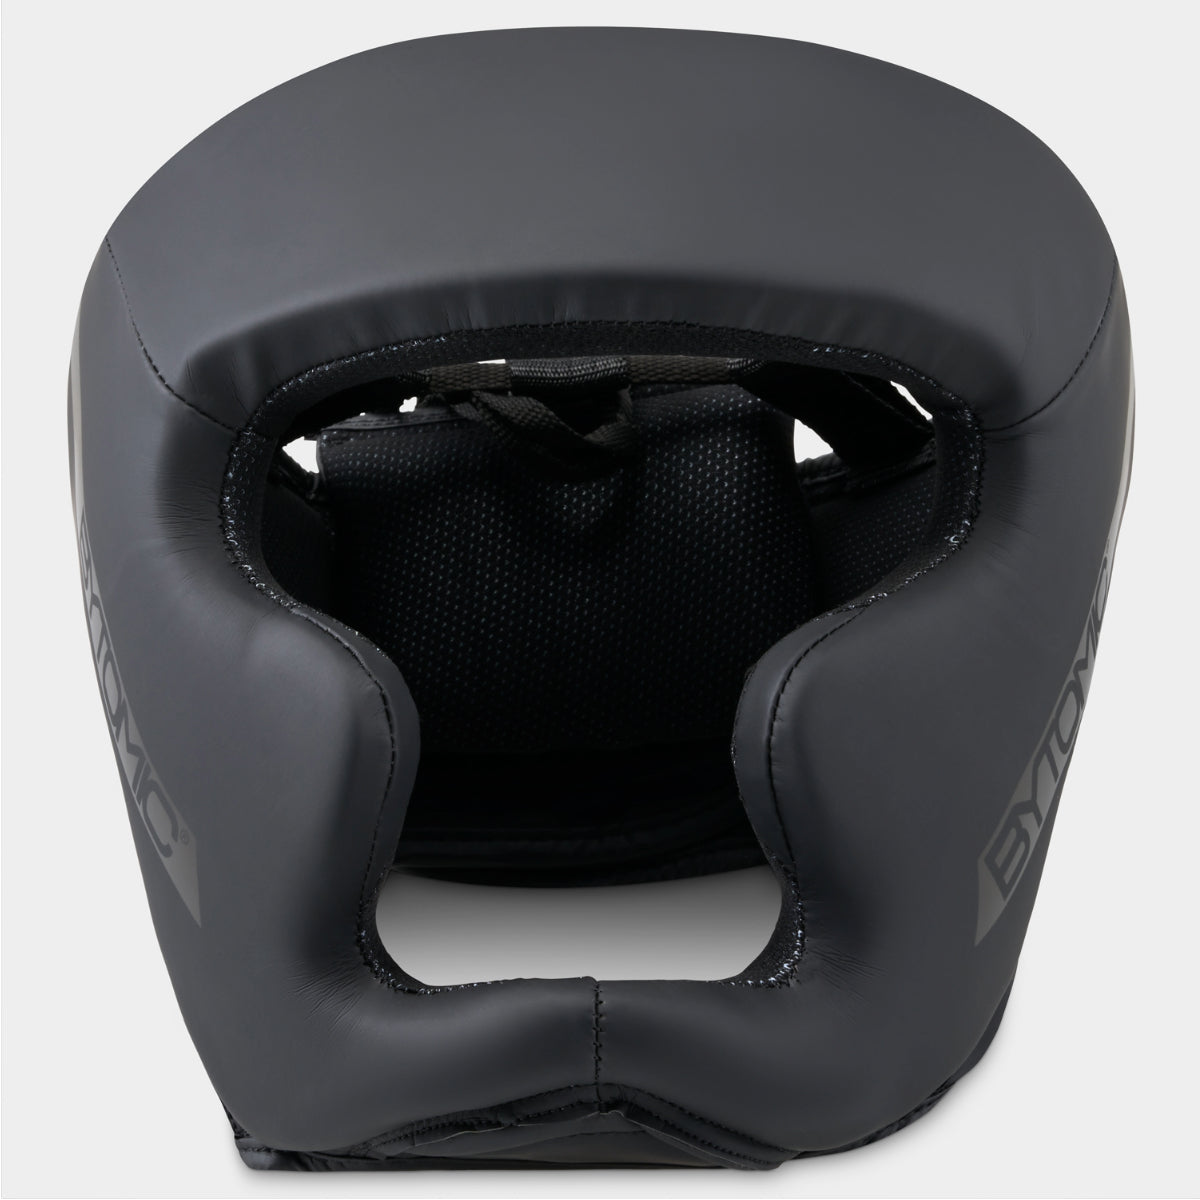 Kickboxing Head Guards from Made4Fighters